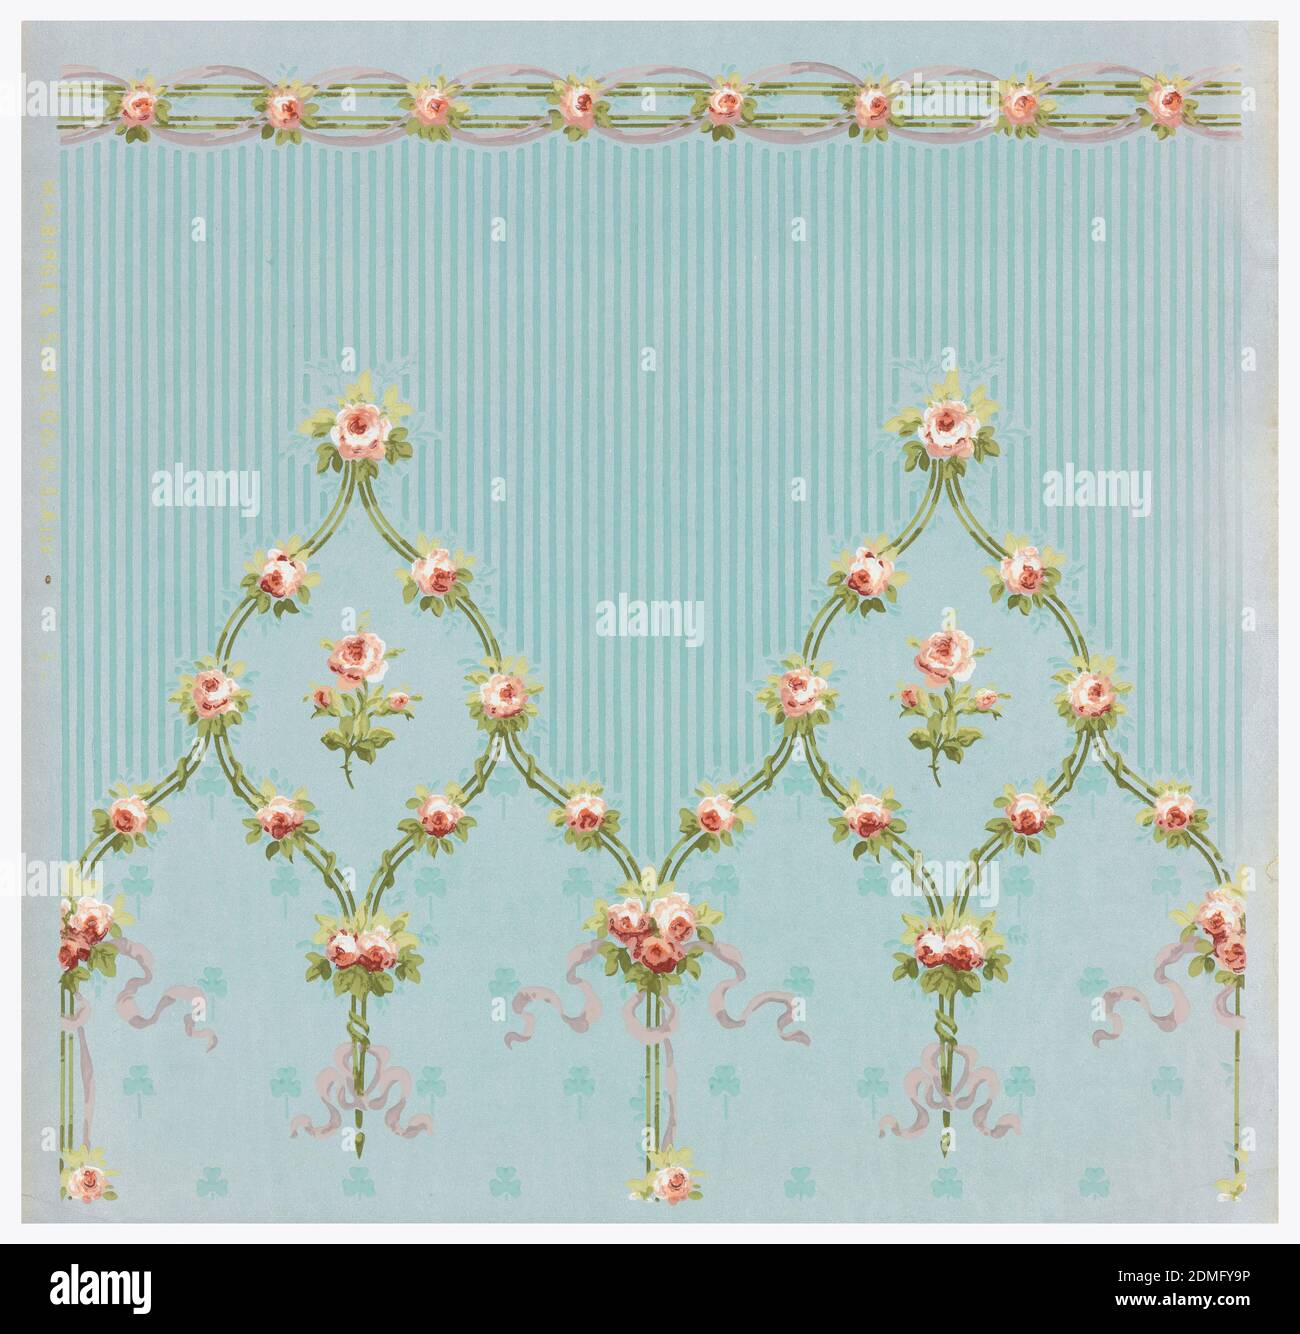 Sidewall and frieze, M.H. Birge & Sons Co., 1834, Machine-printed paper, mica, a) Petite floral stripe pattern. Small bouquets with ribbons on moire ground with three-leaf clover motif; b) Crown frieze with floral stripe meeting in pointed arch. Pinstripe pattern above arches. Printed in selvedge: 'MH Birge & Sons Co USA'., Buffalo, New York, USA, 1905–1920, Wallcoverings, Sidewall and frieze Stock Photo